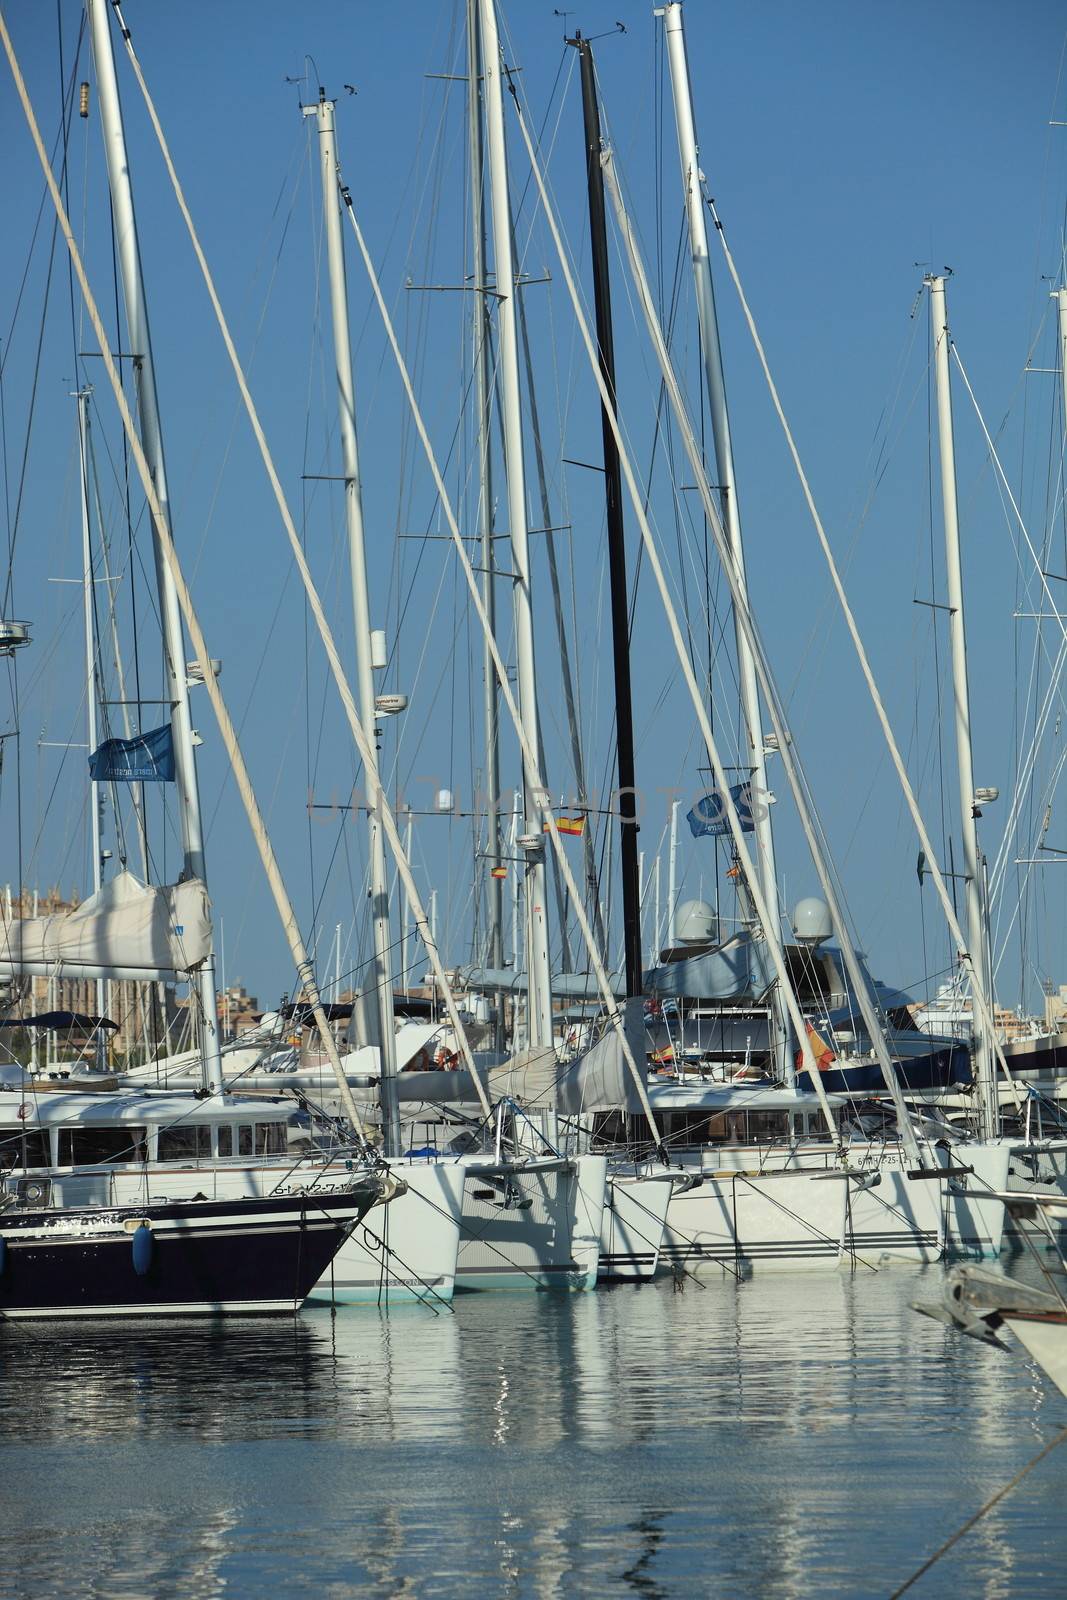 Masts and rigging of yachts moored in harbour by Farina6000